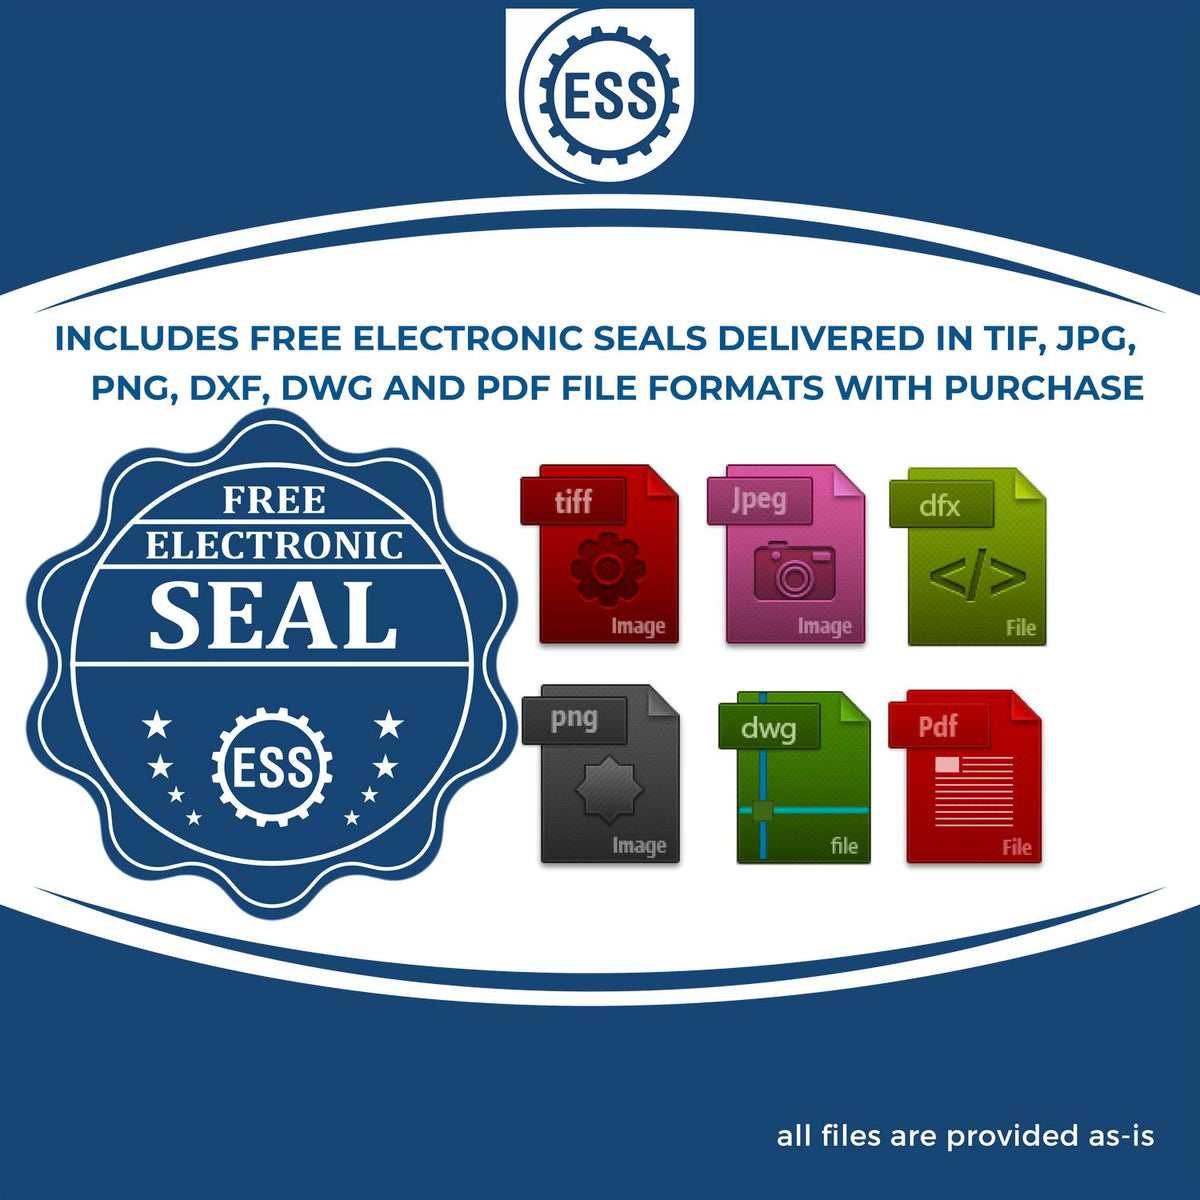 An infographic for the free electronic seal for the State of Virginia Extended Long Reach Geologist Seal illustrating the different file type icons such as DXF, DWG, TIF, JPG and PNG.